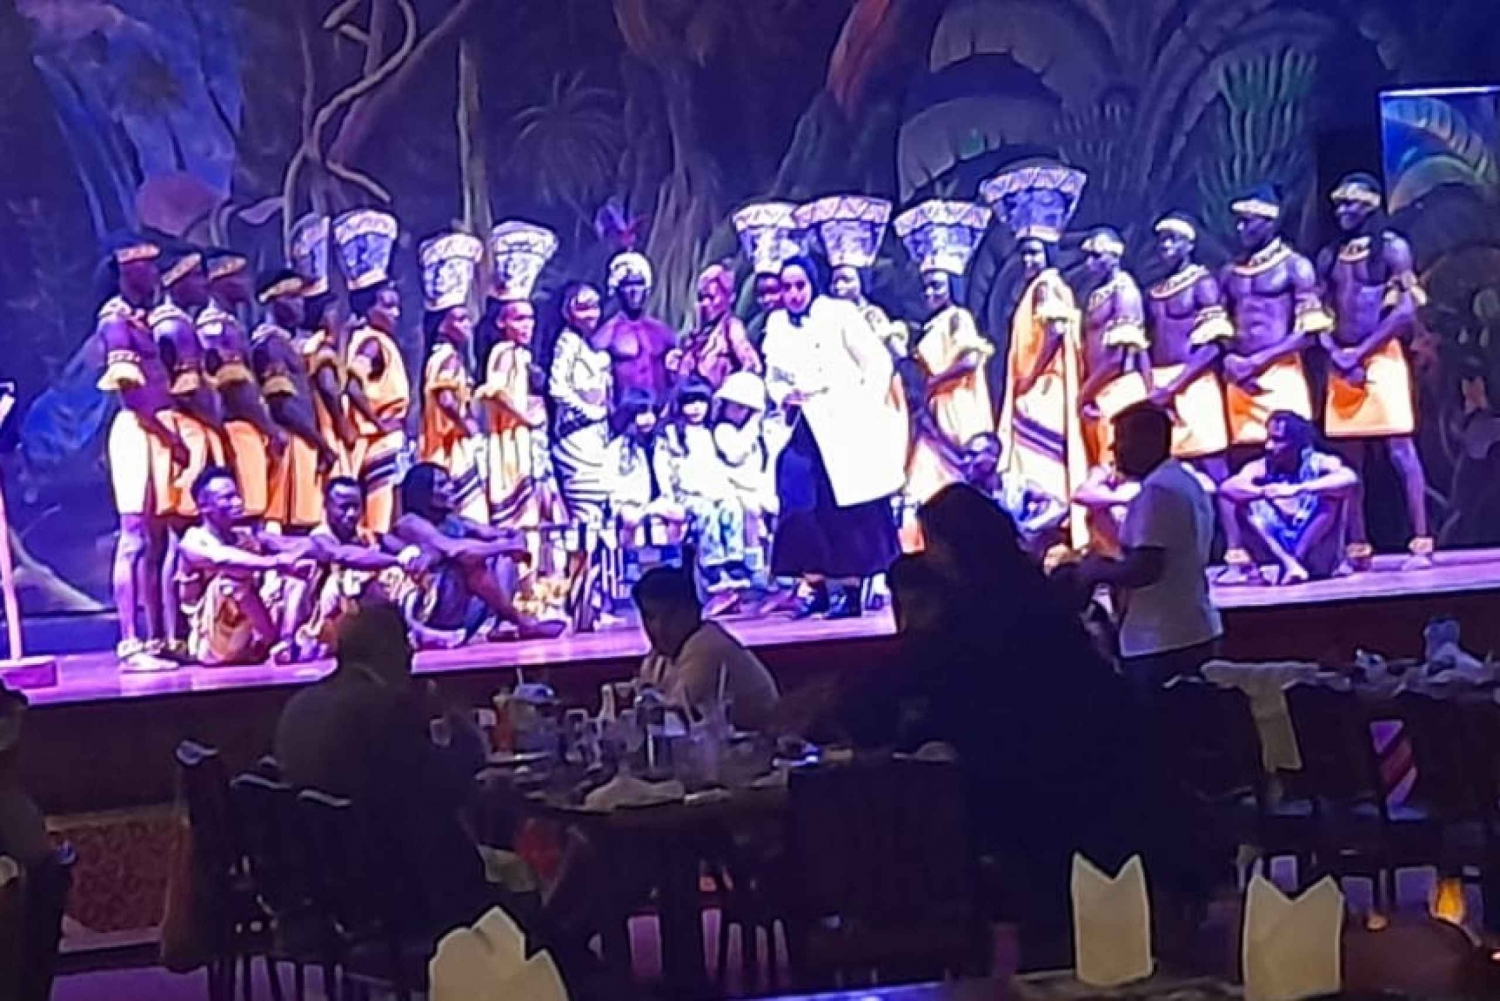 Dinner with live cat dance at Safari park hotel.